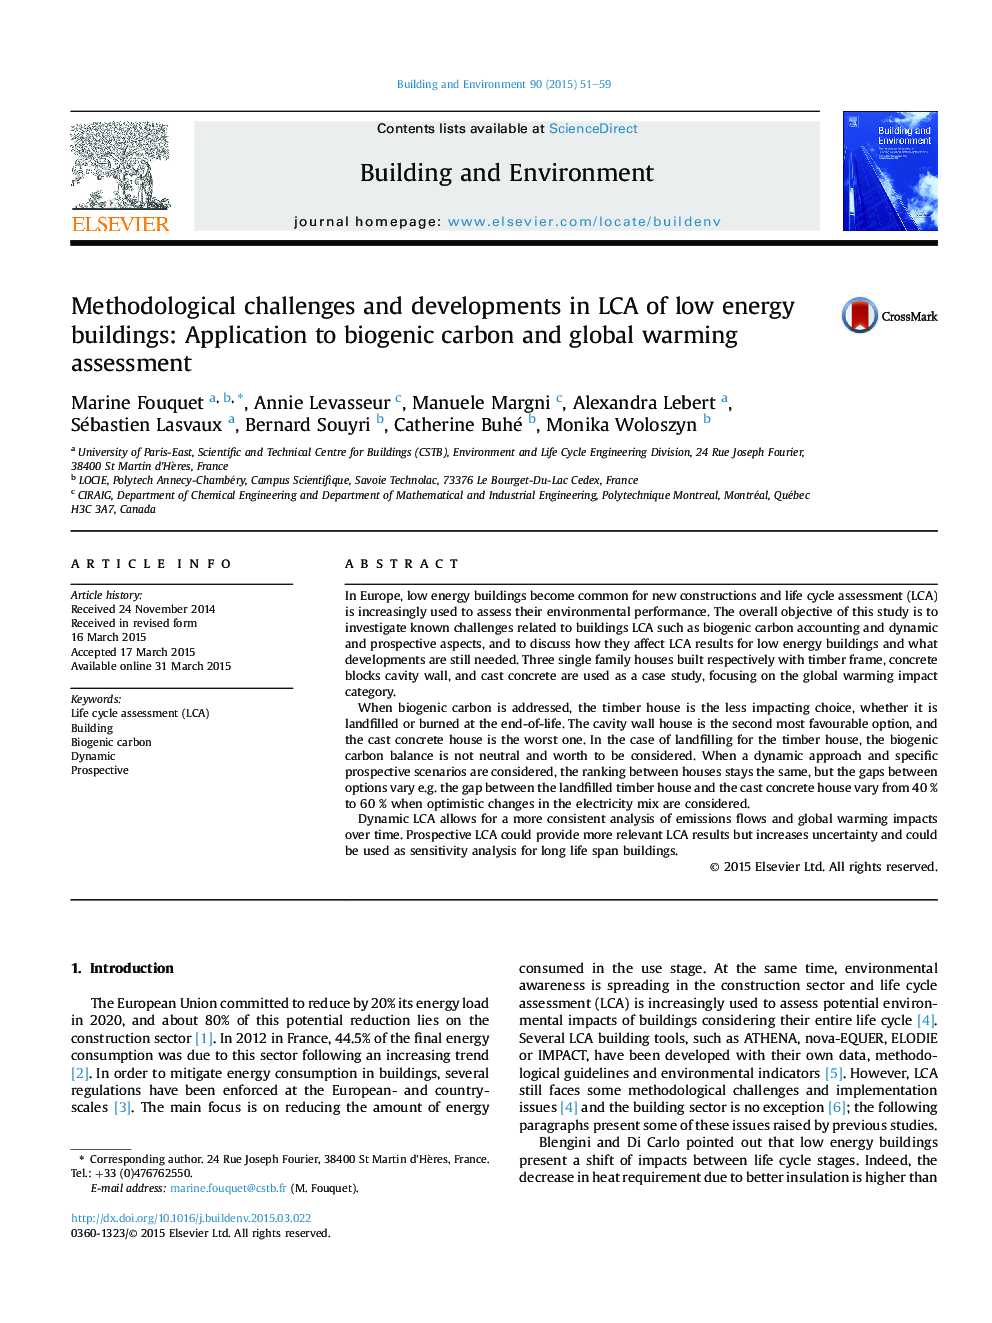 Methodological challenges and developments in LCA of low energy buildings: Application to biogenic carbon and global warming assessment